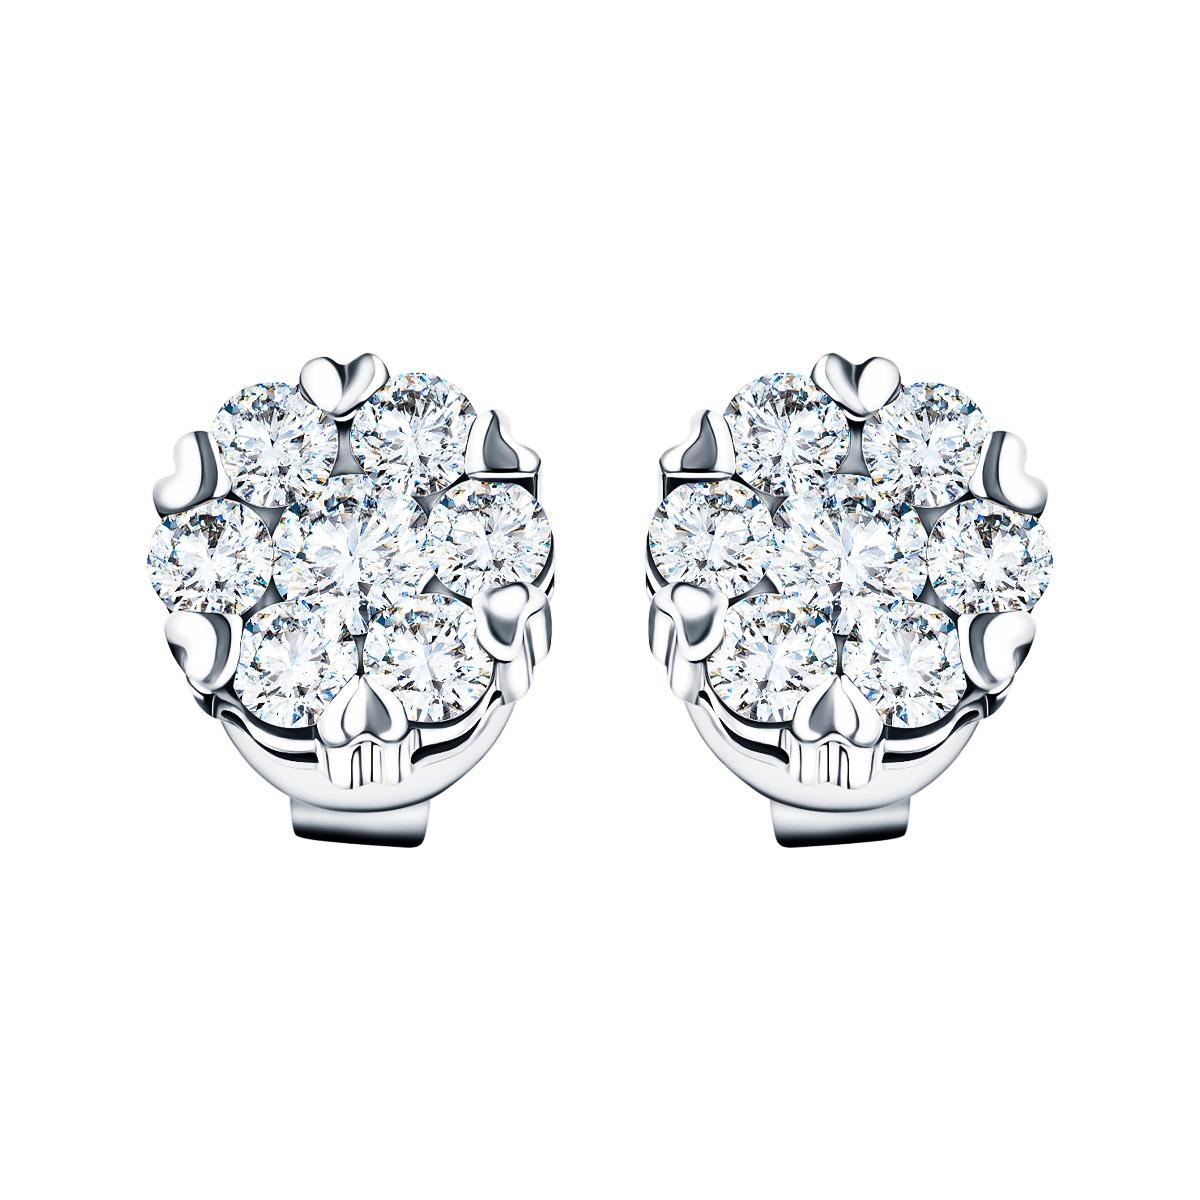 Elegant and eye catching 0.35 Carat Mini Daisy Cluster earrings set with white colour G/H and an eye clean clarity SI round brilliant cut diamonds made with 18 Karat White Gold. Available in yellow and rose gold on request. British